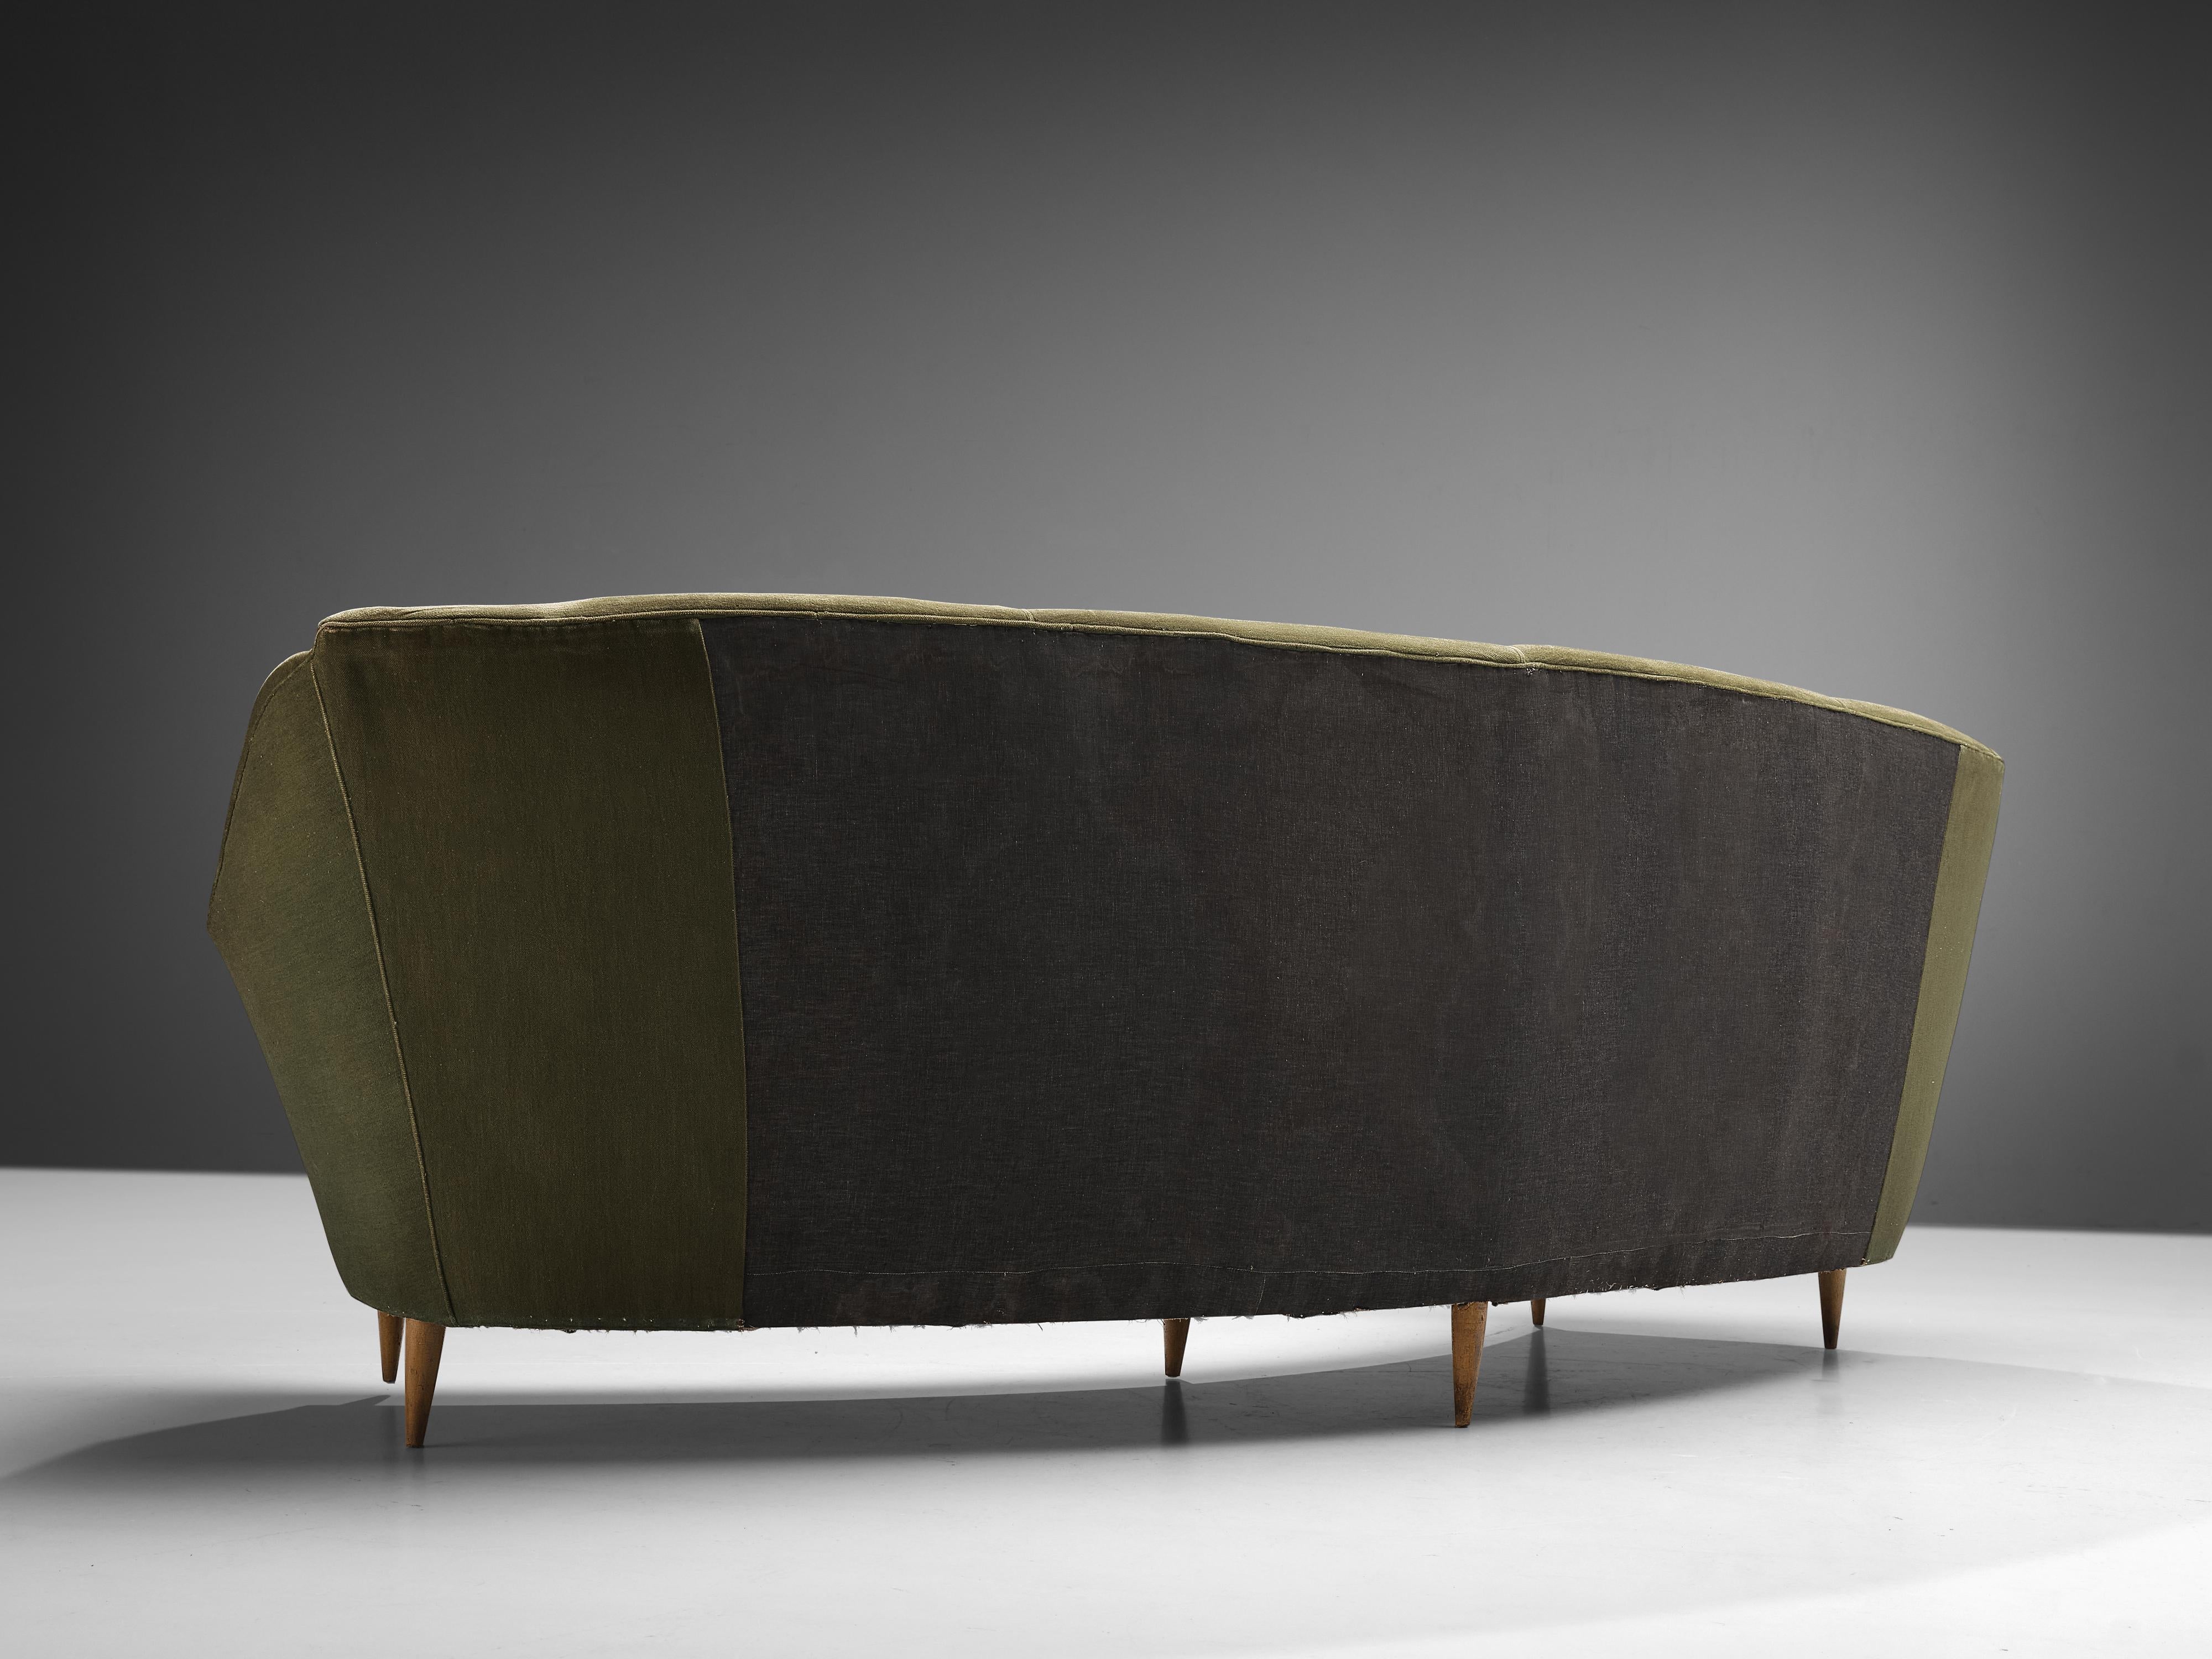 Italian Curved Three-Seat Sofa in Light Green Upholstery